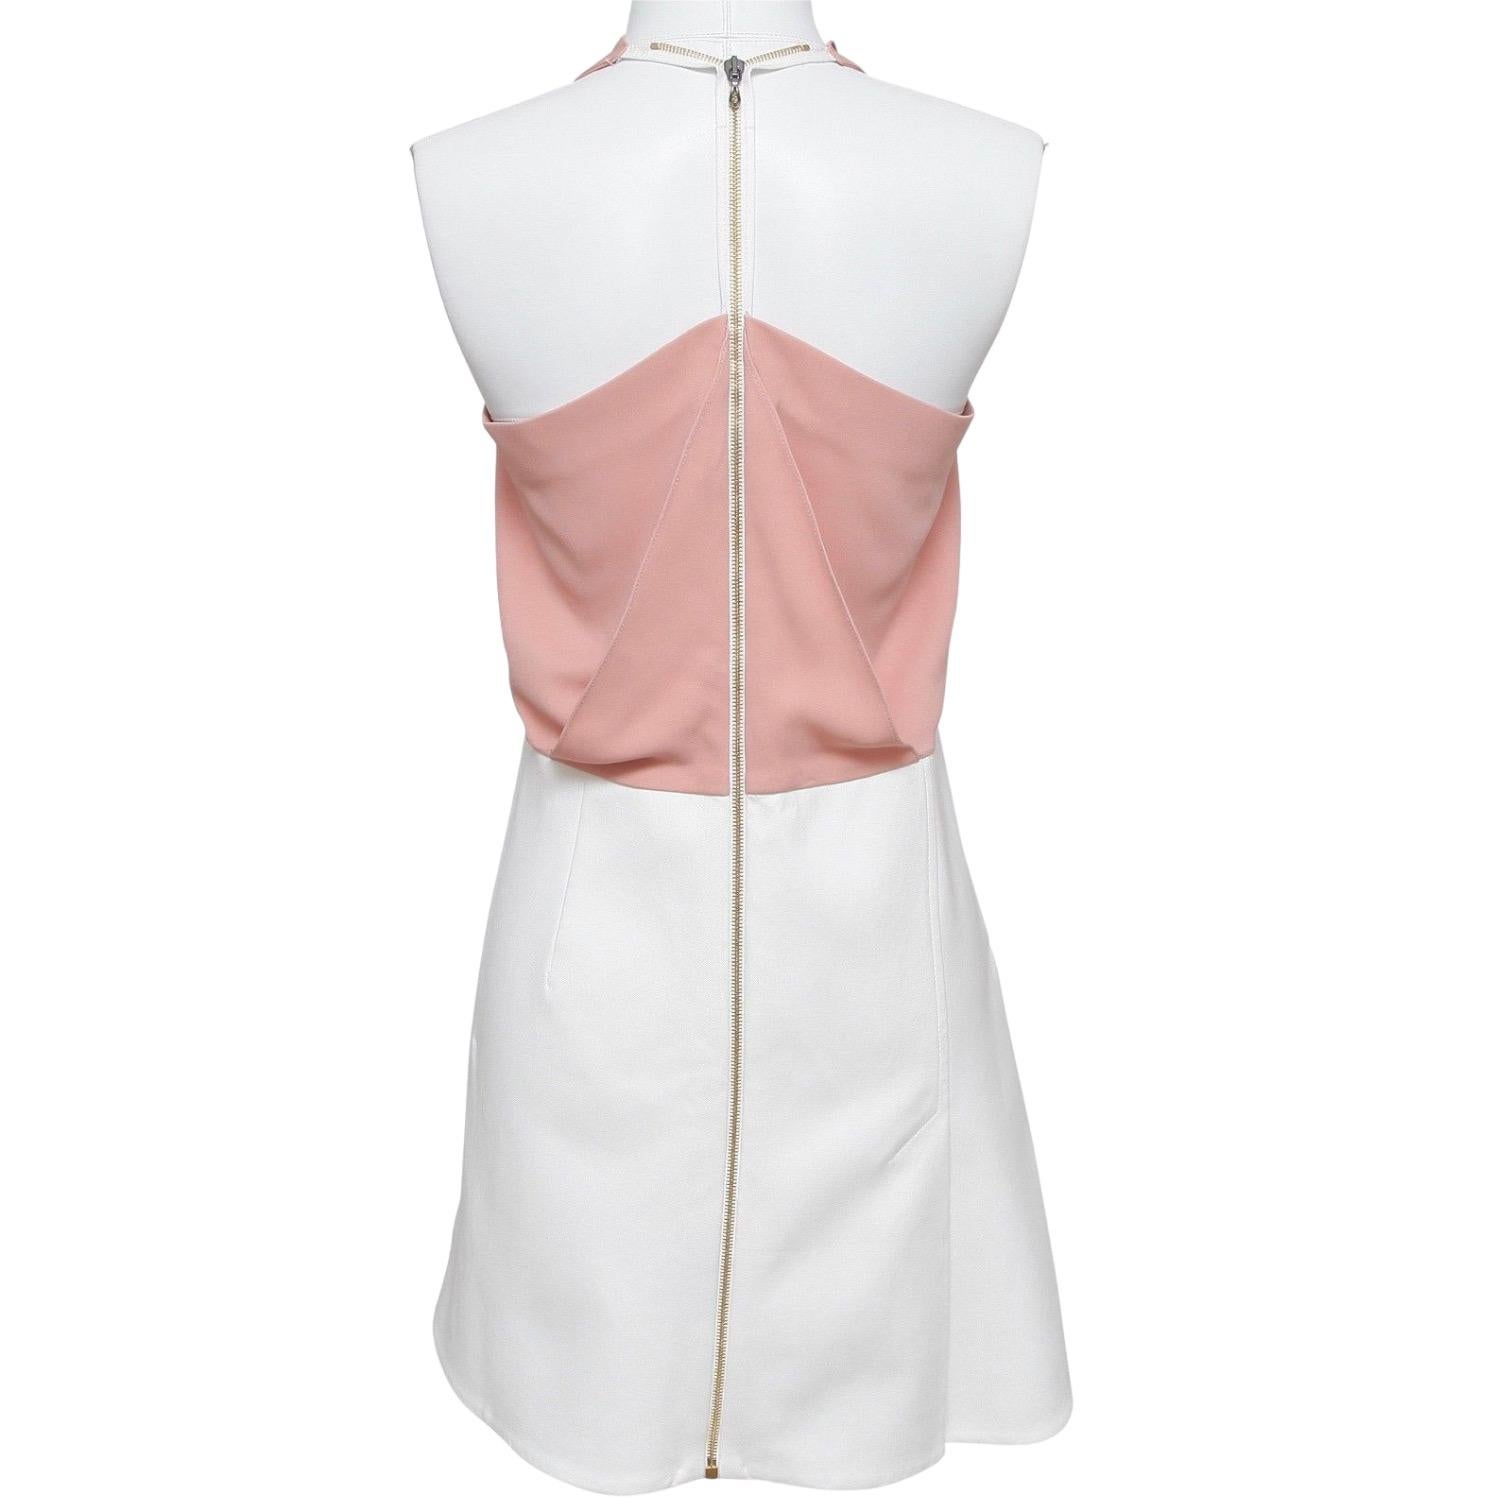 ROLAND MOURET Sleeveless Dress Cowl Neck 2016 PAGET White Pink 14 BNWT $1230 For Sale 4